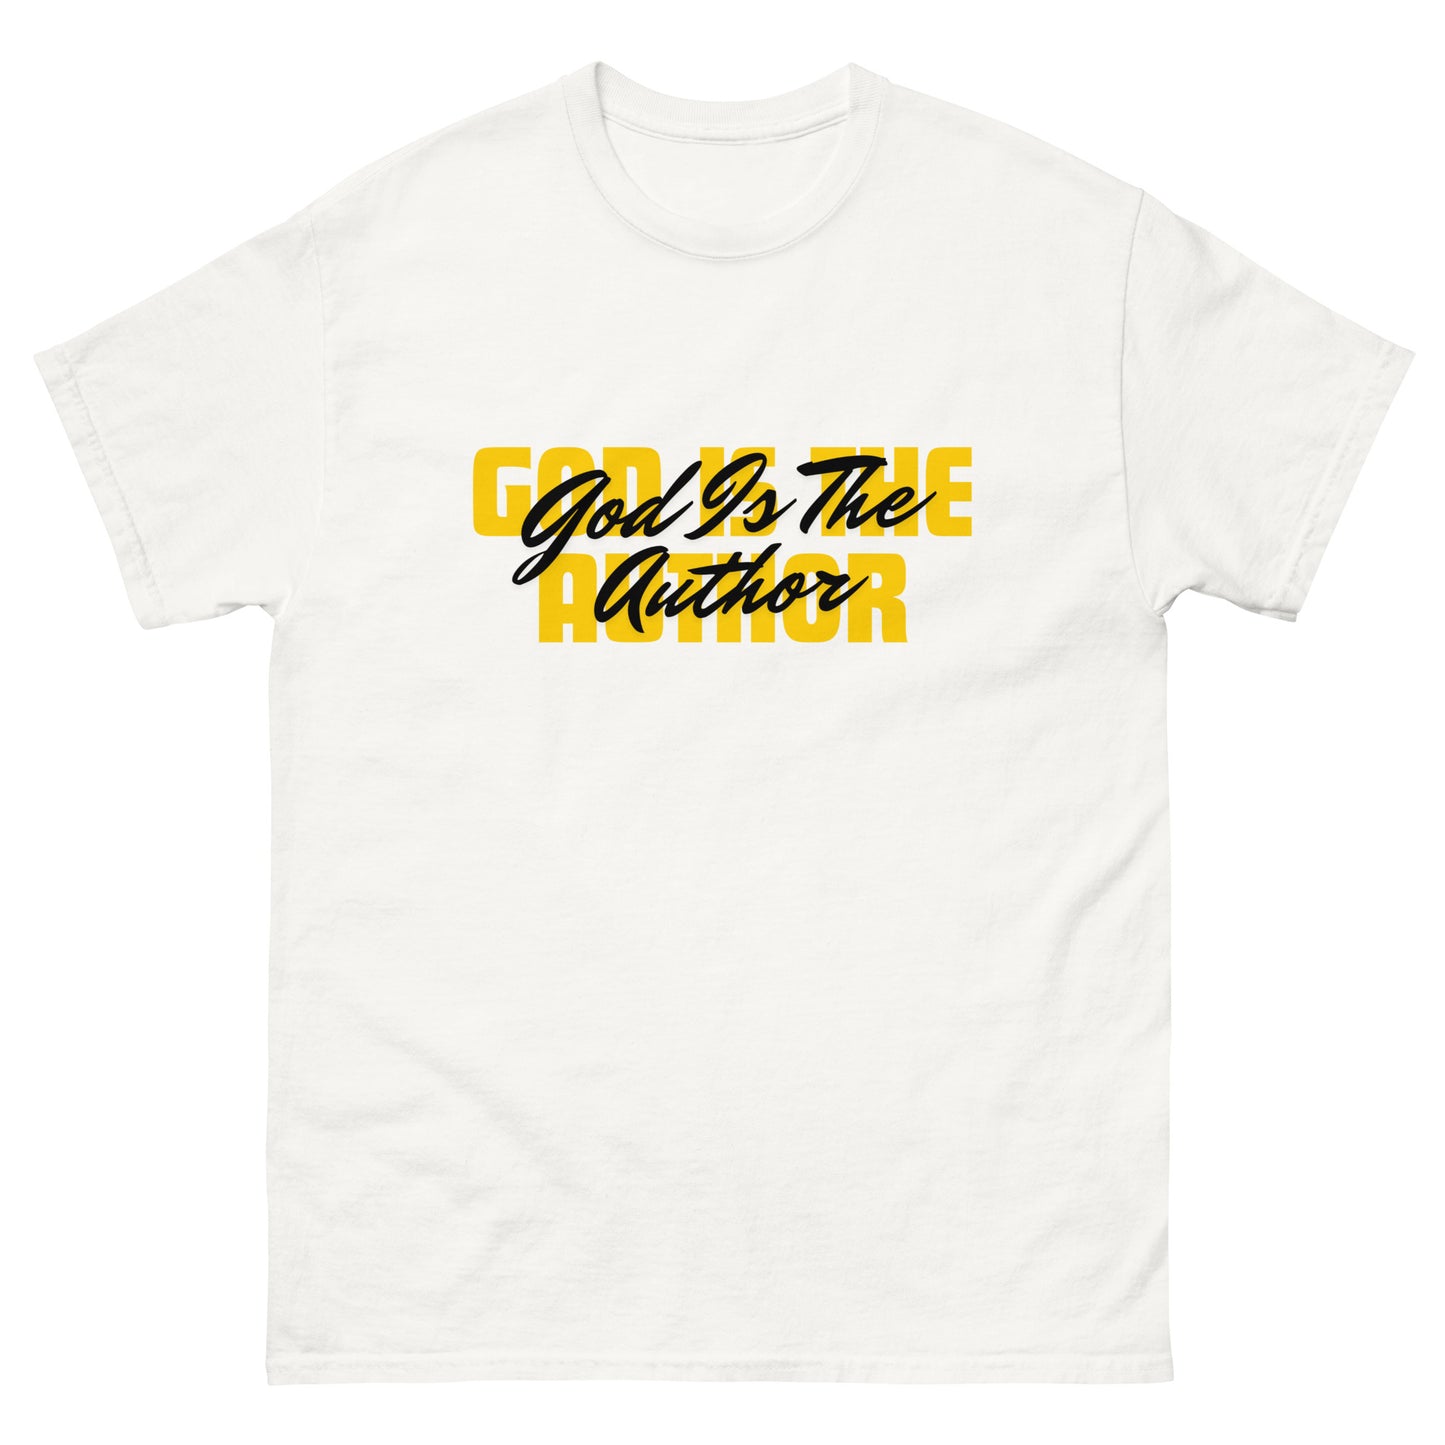 God Is The Author - Men and Teen's Classic Tee